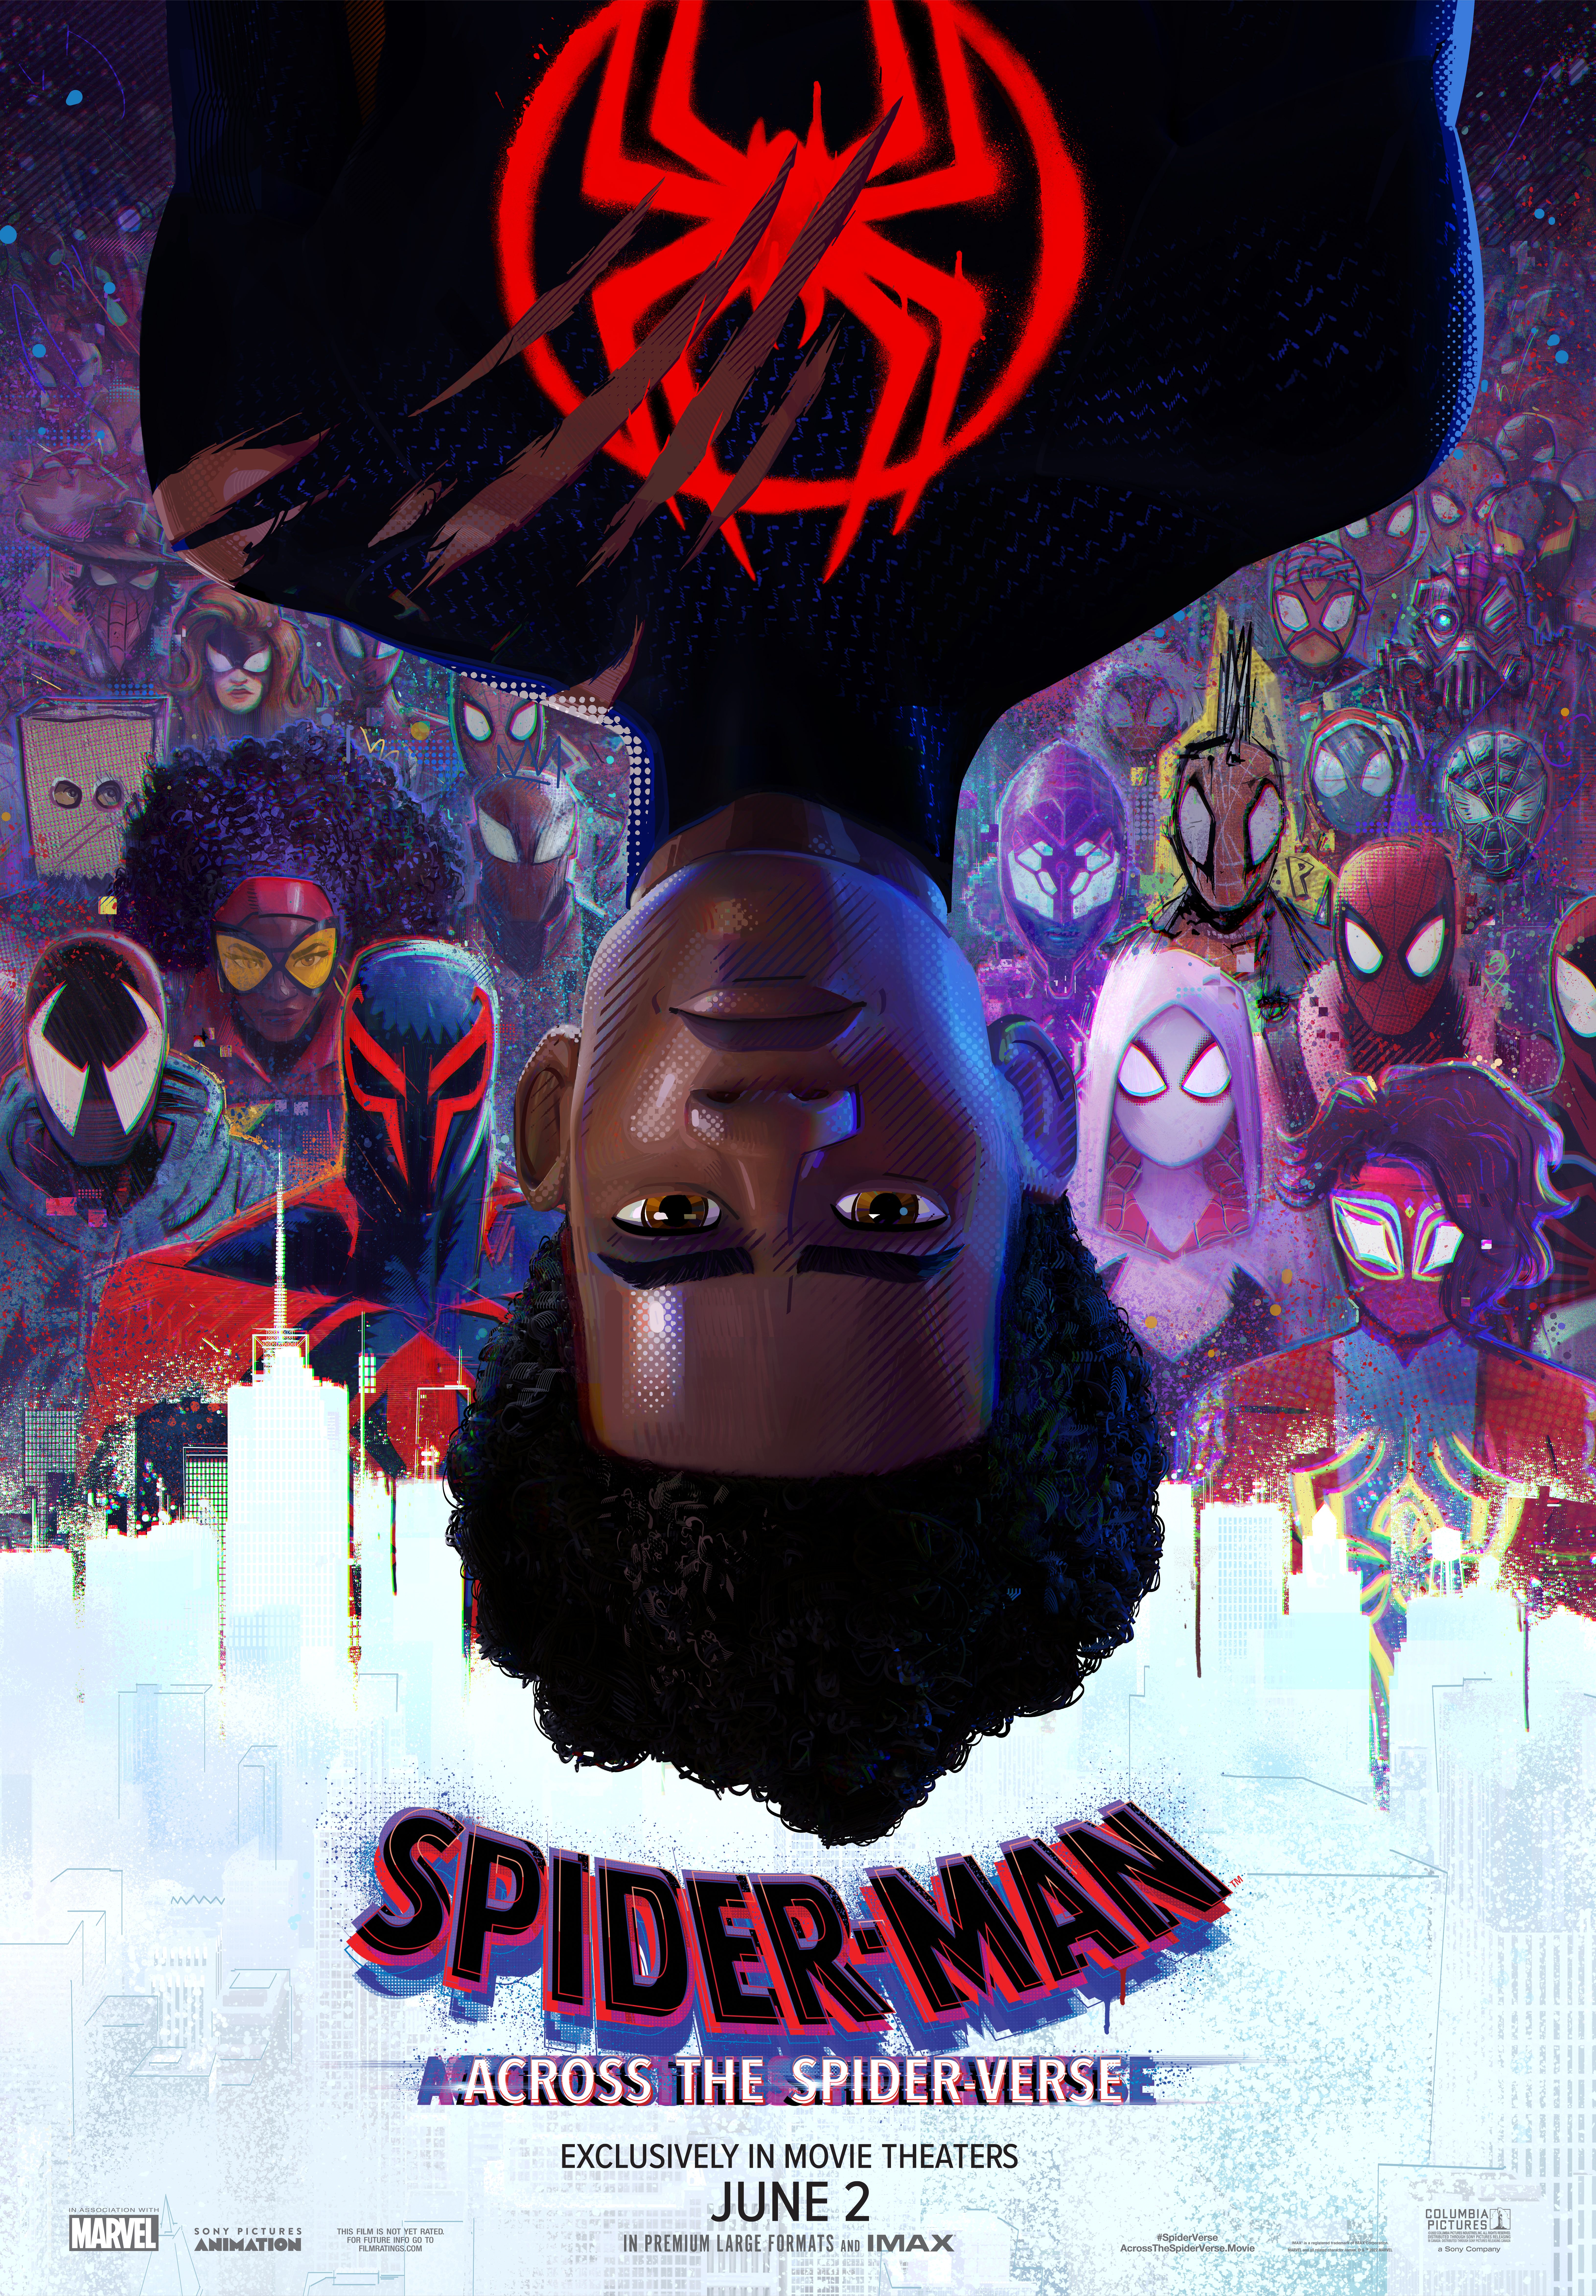 Miles Morales in Spider-man: Across the Spider-verse poster